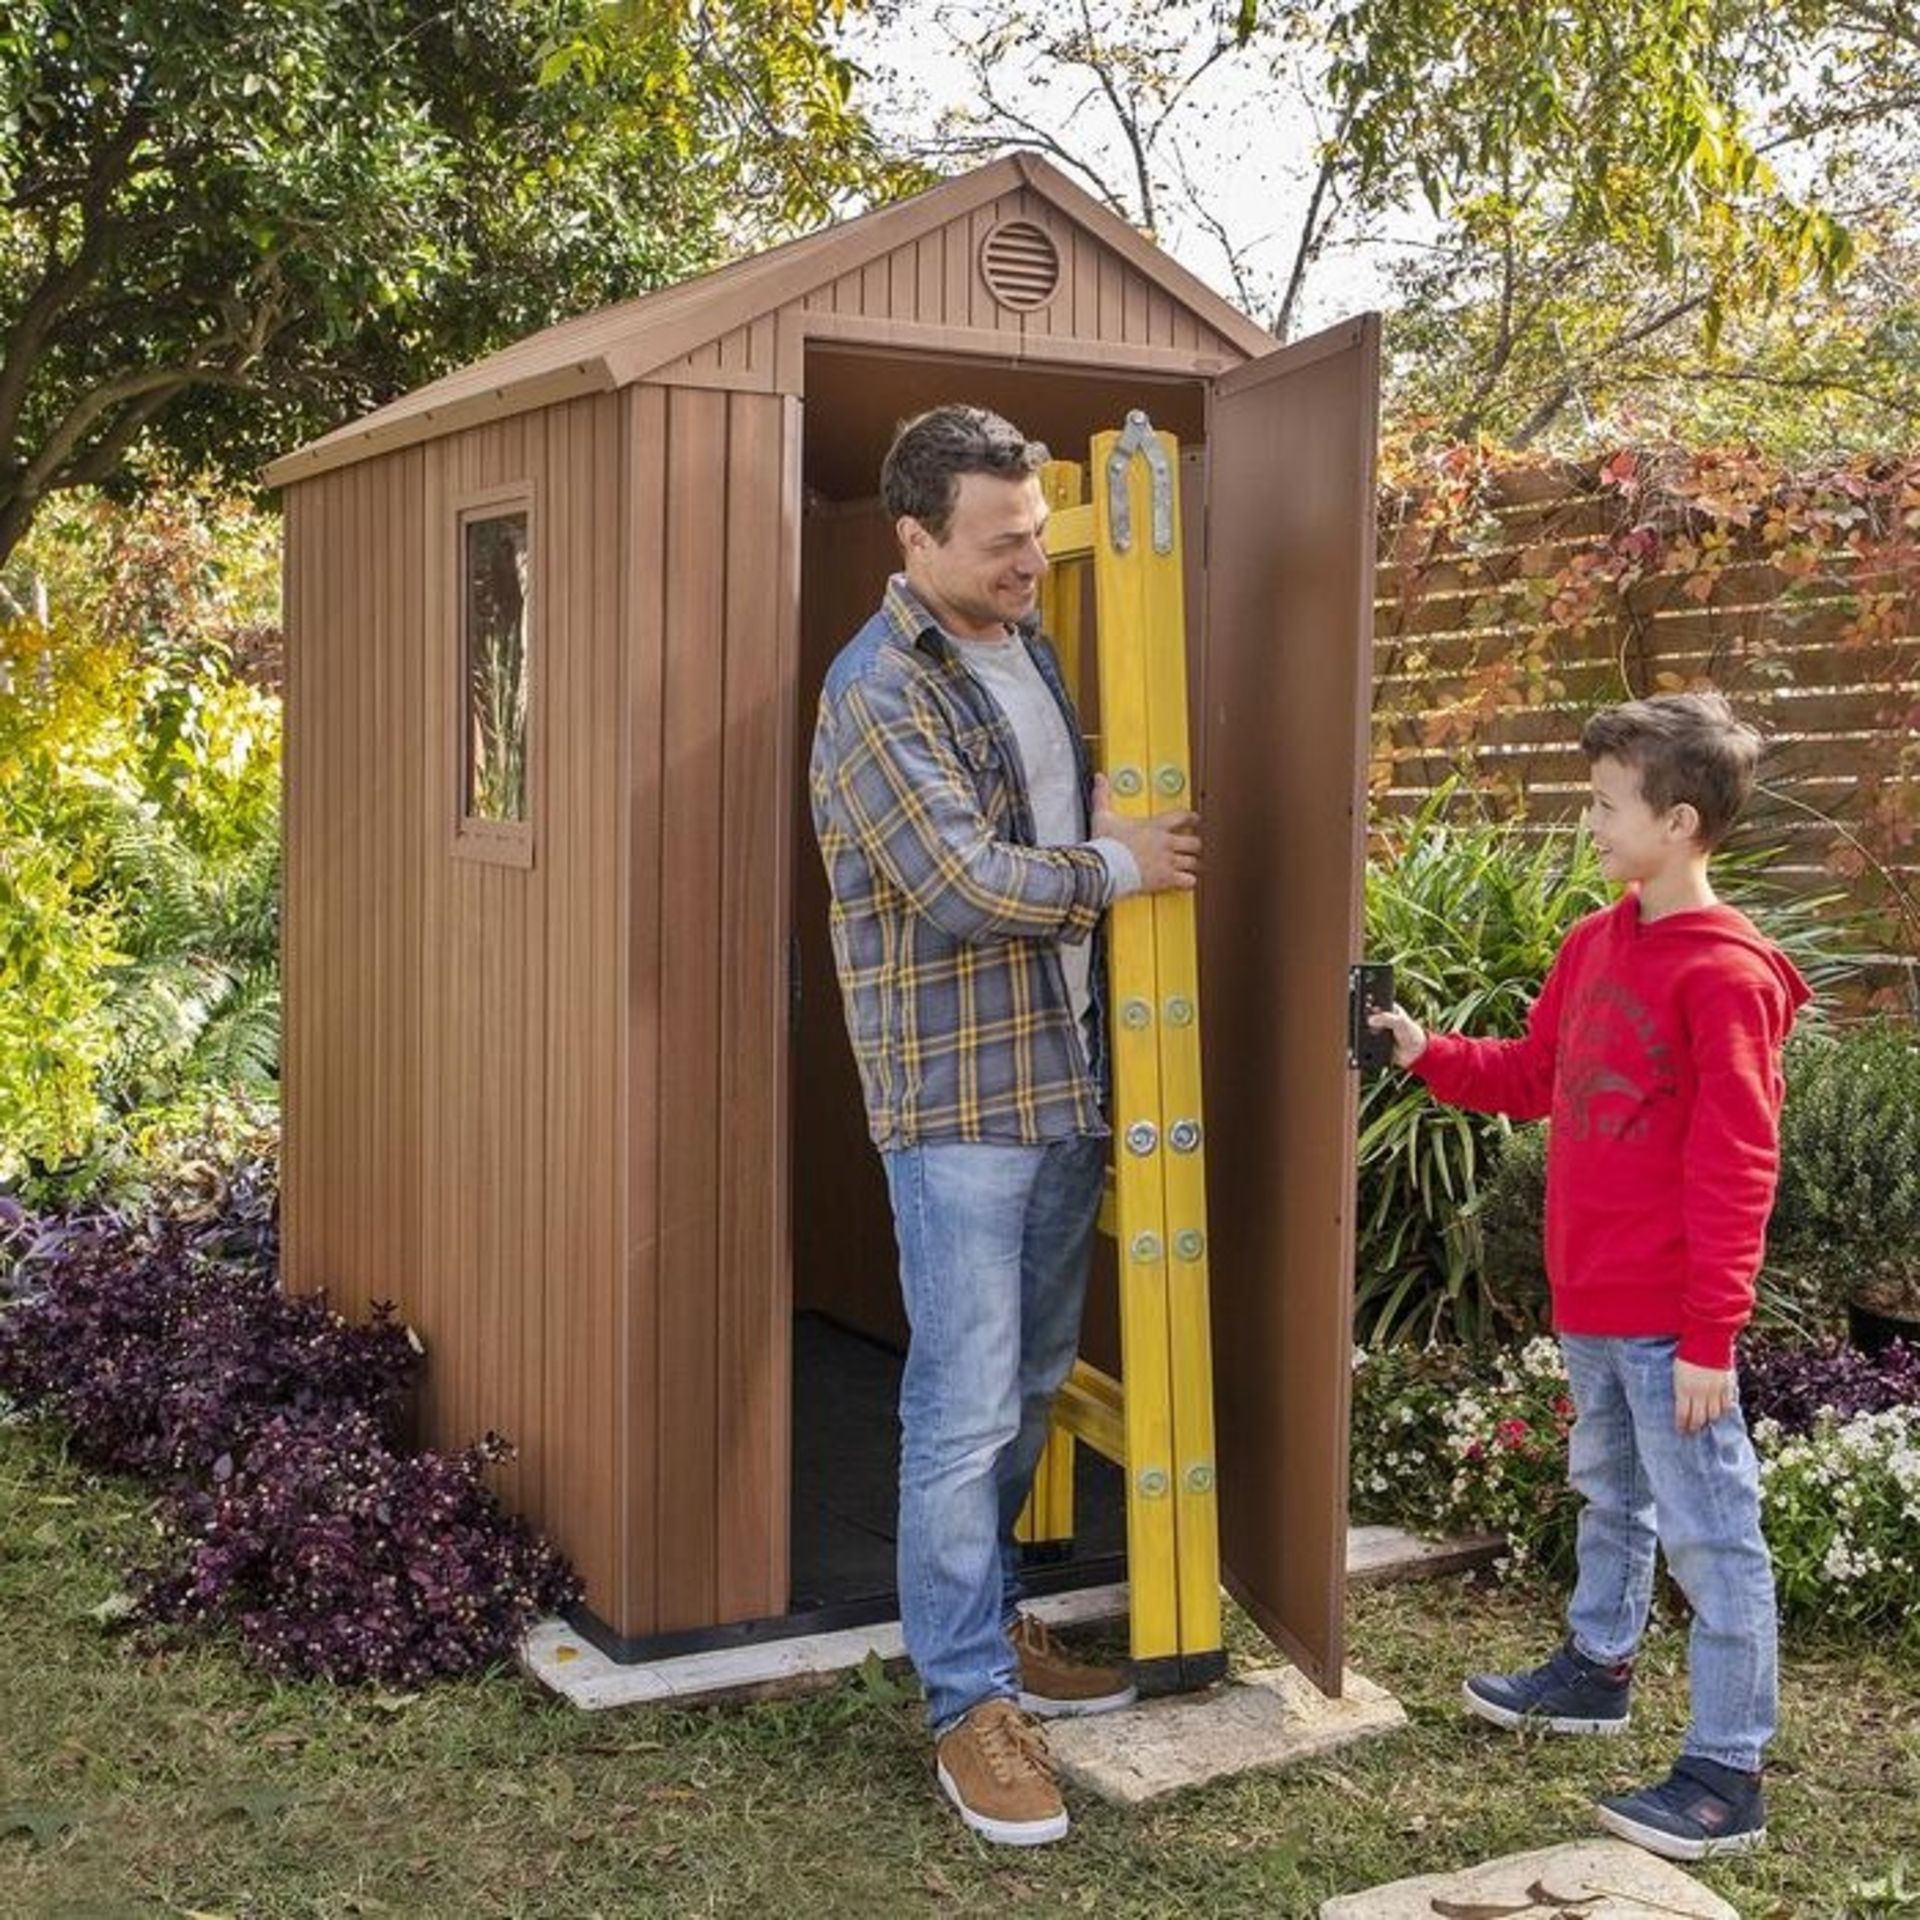 (P1) 1x Keter Darwin Outdoor Apex Shed 4x6 RRP £365. (W112x D176.5x H199.8cm).